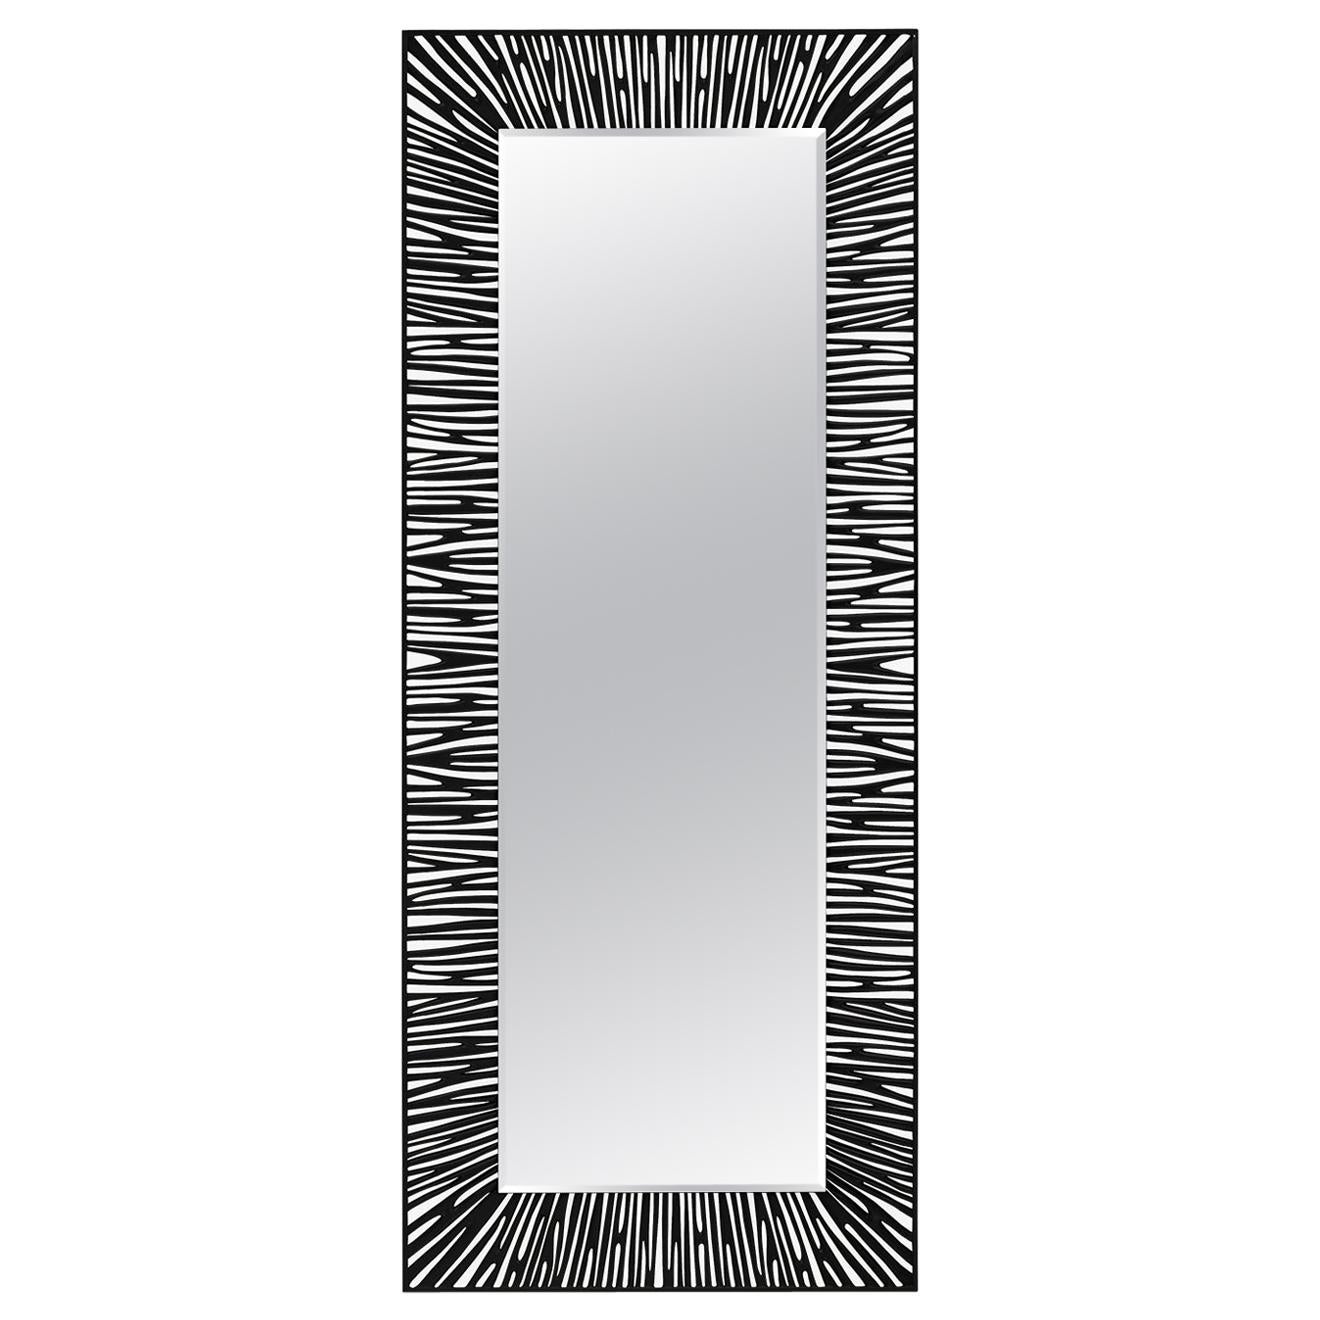 Twiggy High Mirror in Black or Silver or Gold